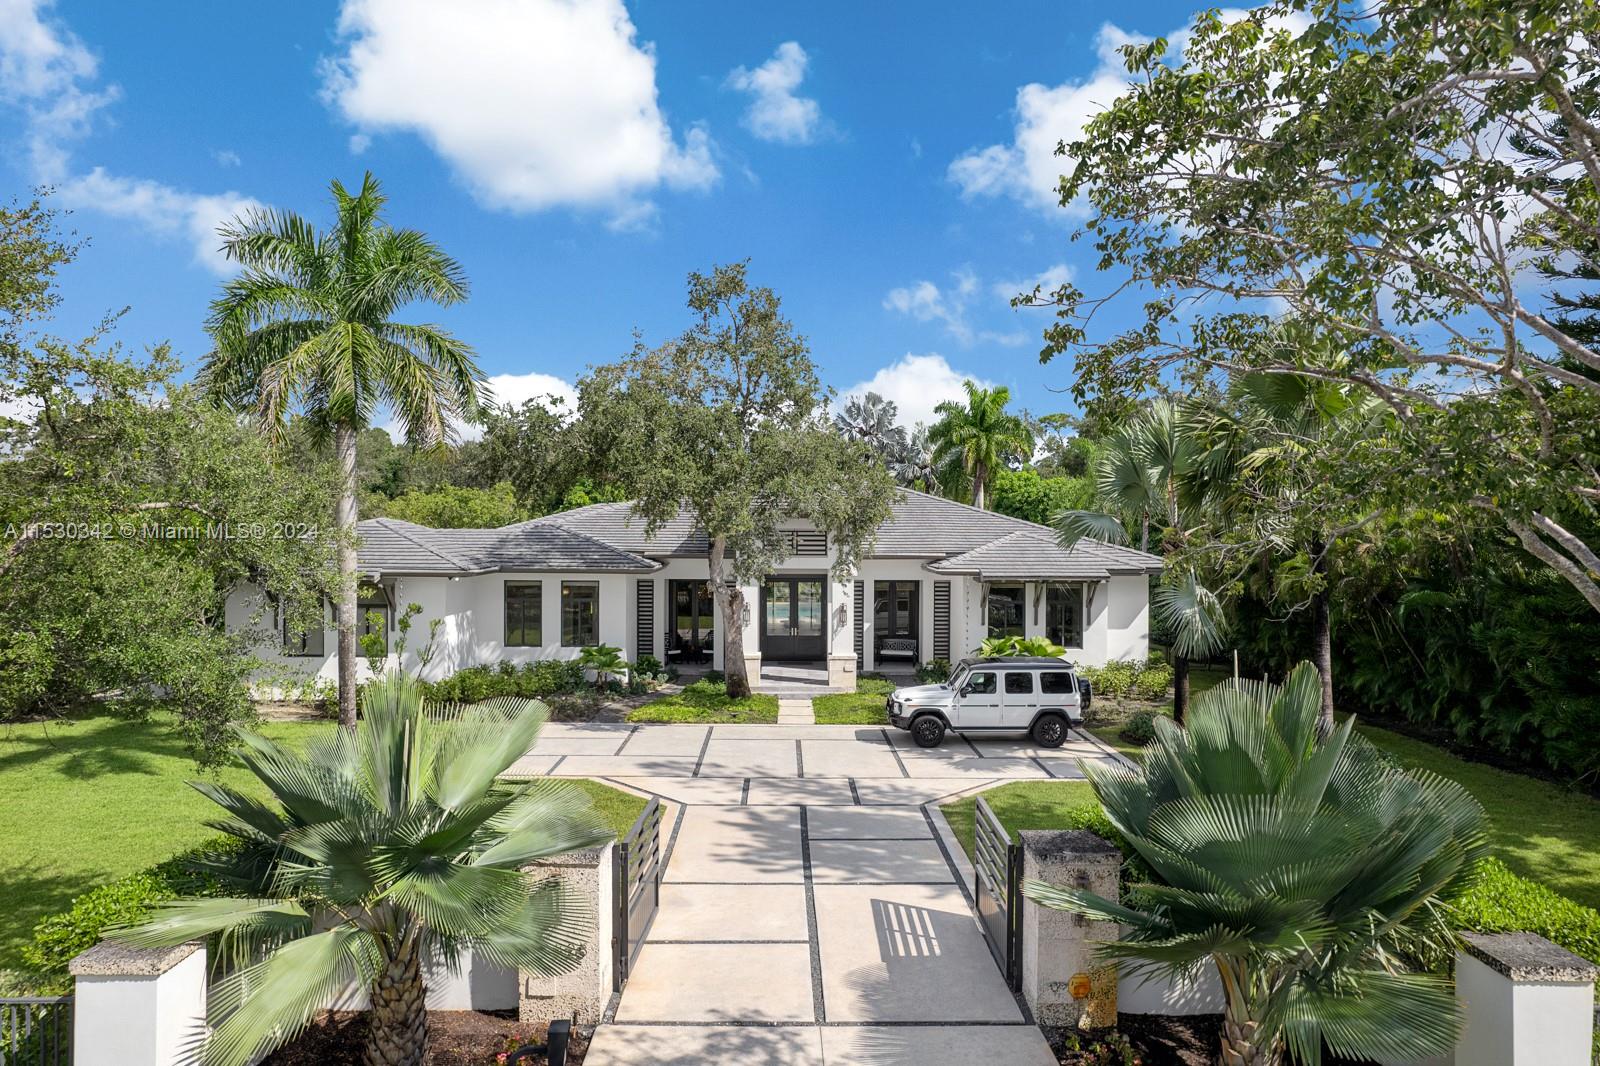 Luxury awaits in this Pinecrest modern estate, custom-built in 2020 with state-of-the-art construction and impeccable finishes. Set on a spacious 32,234 sq. ft. corner lot, this single-story residence boasts a 5-bed/5.5 bath open floor plan and a 2-car garage with impact windows & doors throughout. Enjoy expansive living areas, a family room, a wine gallery, and a bar – perfect for entertaining. The kitchen is a chef's dream with top-of-the-line Thermador appliances, a walk-in pantry, custom wood cabinetry, & quartz countertops. The master suite features double walk-in closets and a resort-style bathroom. Outside, indulge in the beautiful pool and a perfect backyard oasis for entertaining. Luxuriate in a lifestyle seamlessly blending sophistication with home comforts. By appointment only.